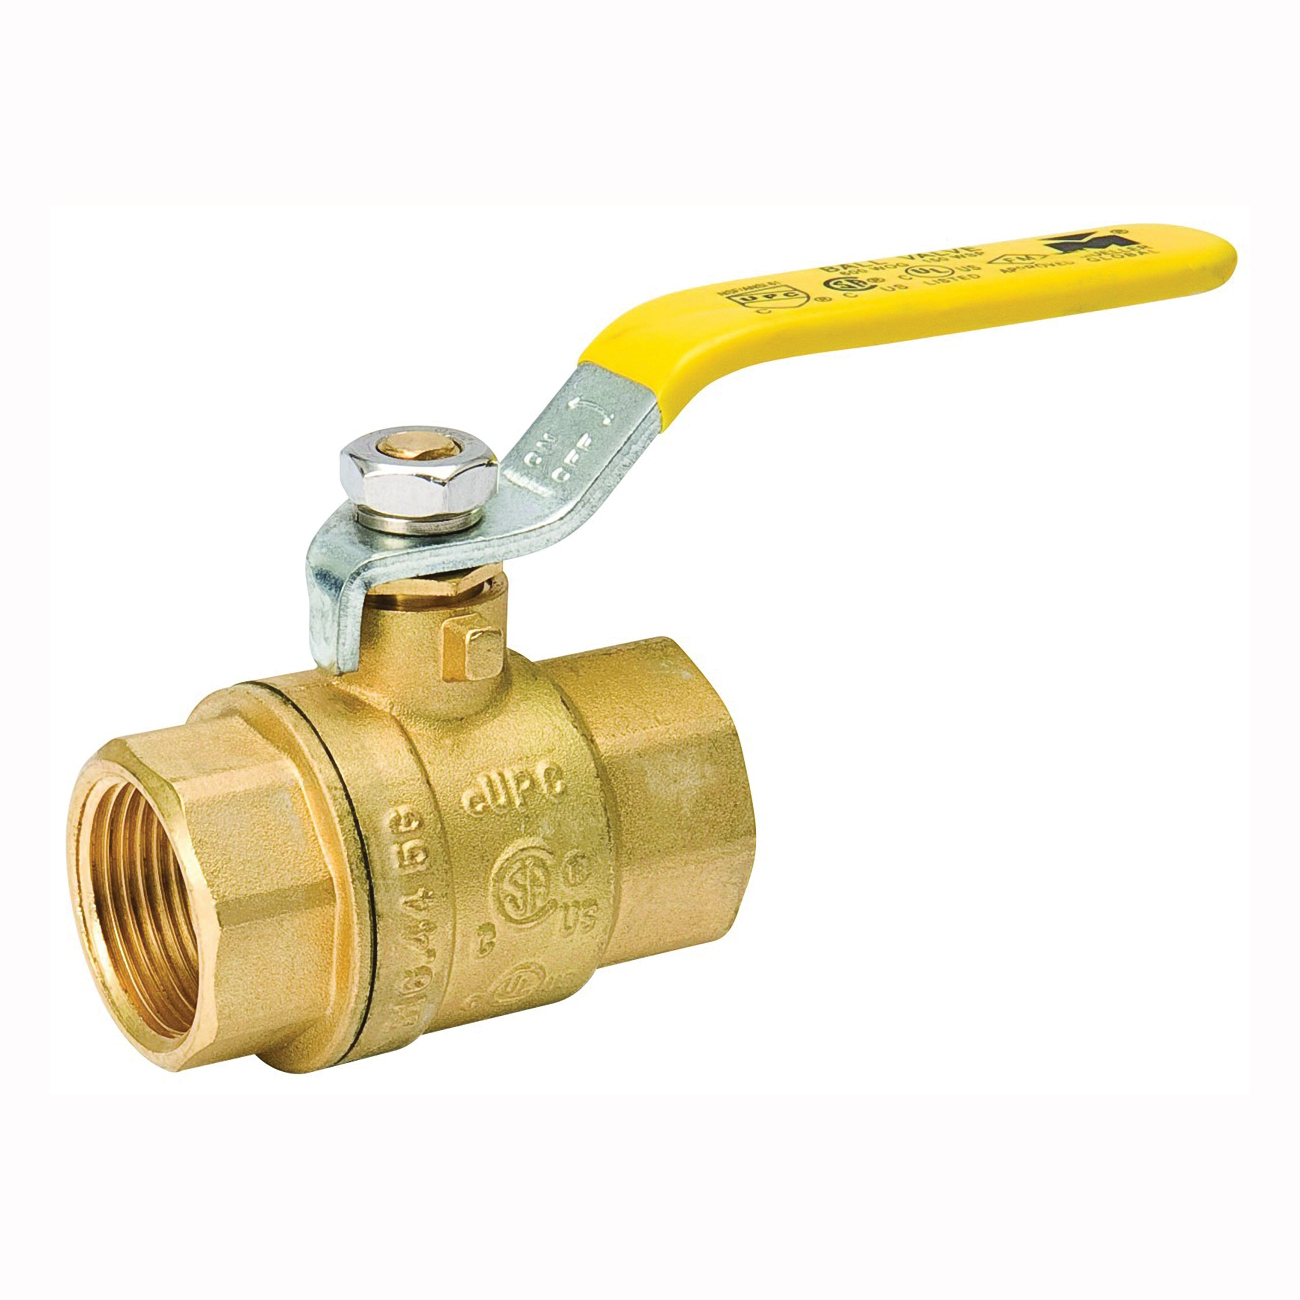 107-827NL Ball Valve, 1-1/2 in Connection, FPT x FPT, 600/150 psi Pressure, Manual Actuator, Brass Body